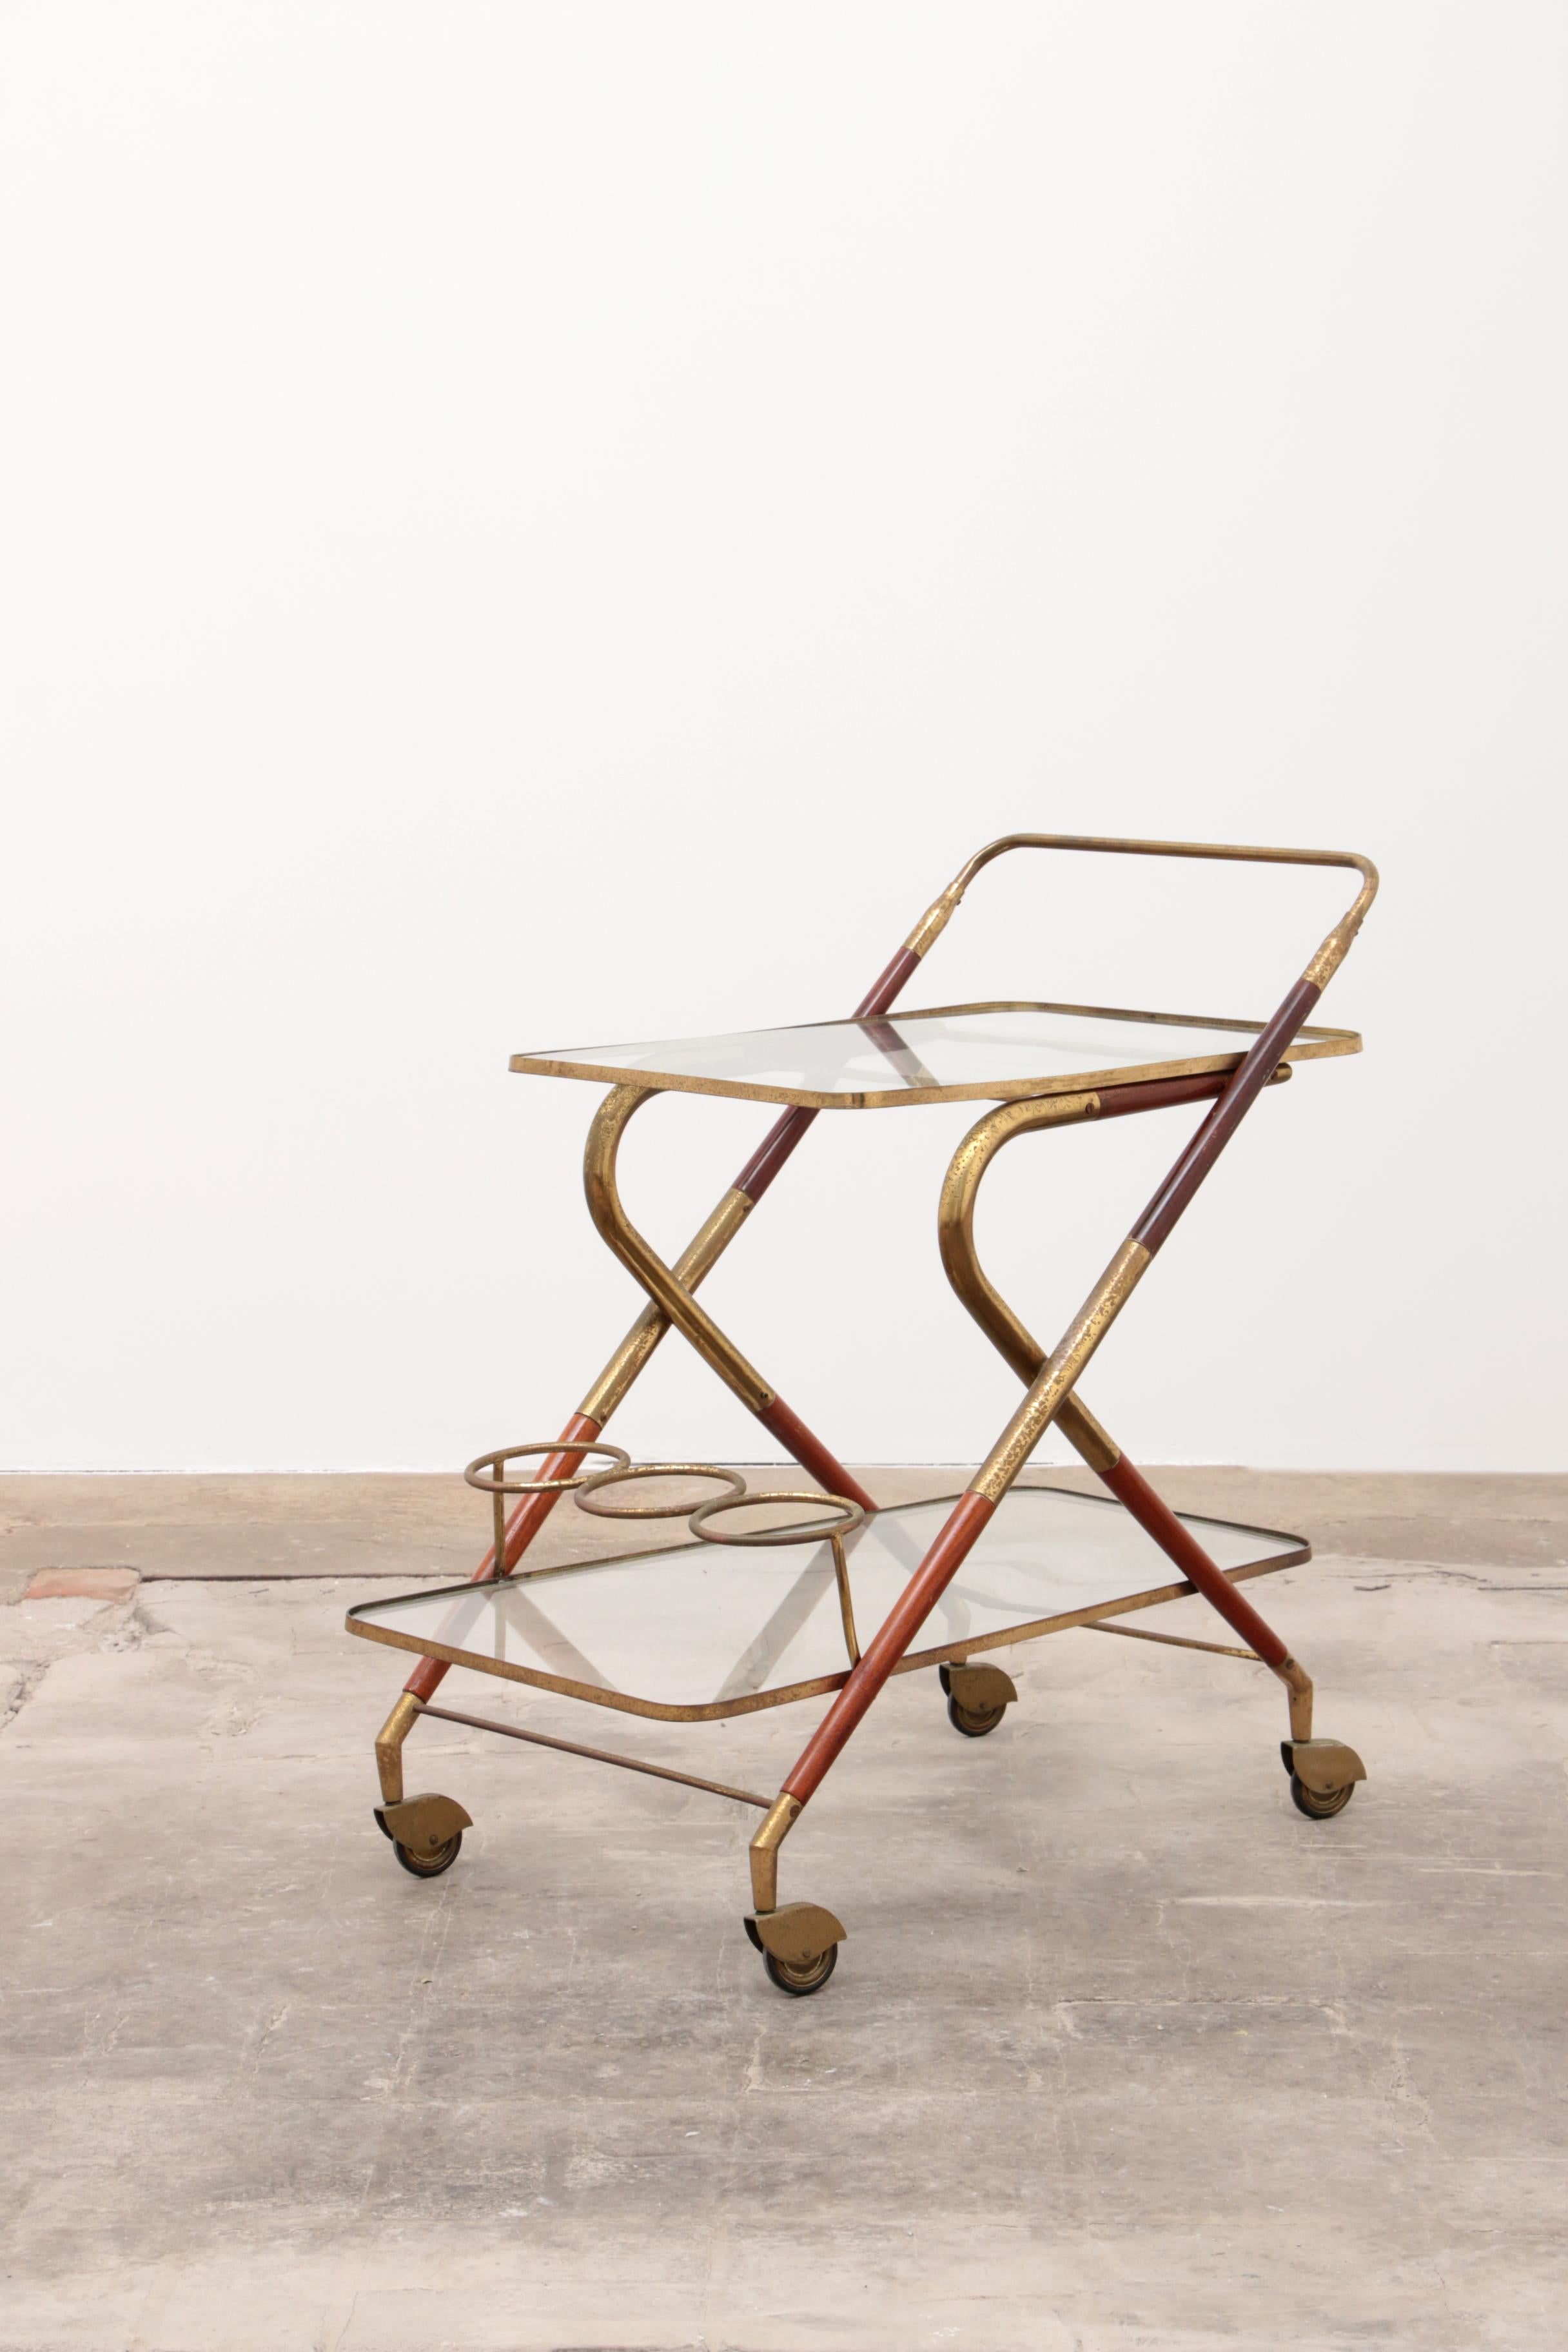 Vintage bar trolley designed by Cesare Lacca for Cassina. This trolley was designed in Italy between 1950 and 1959. It is made of lacquered rosewood and patinated copper. The copper has traces of corrosion. The trolley still has two original glass